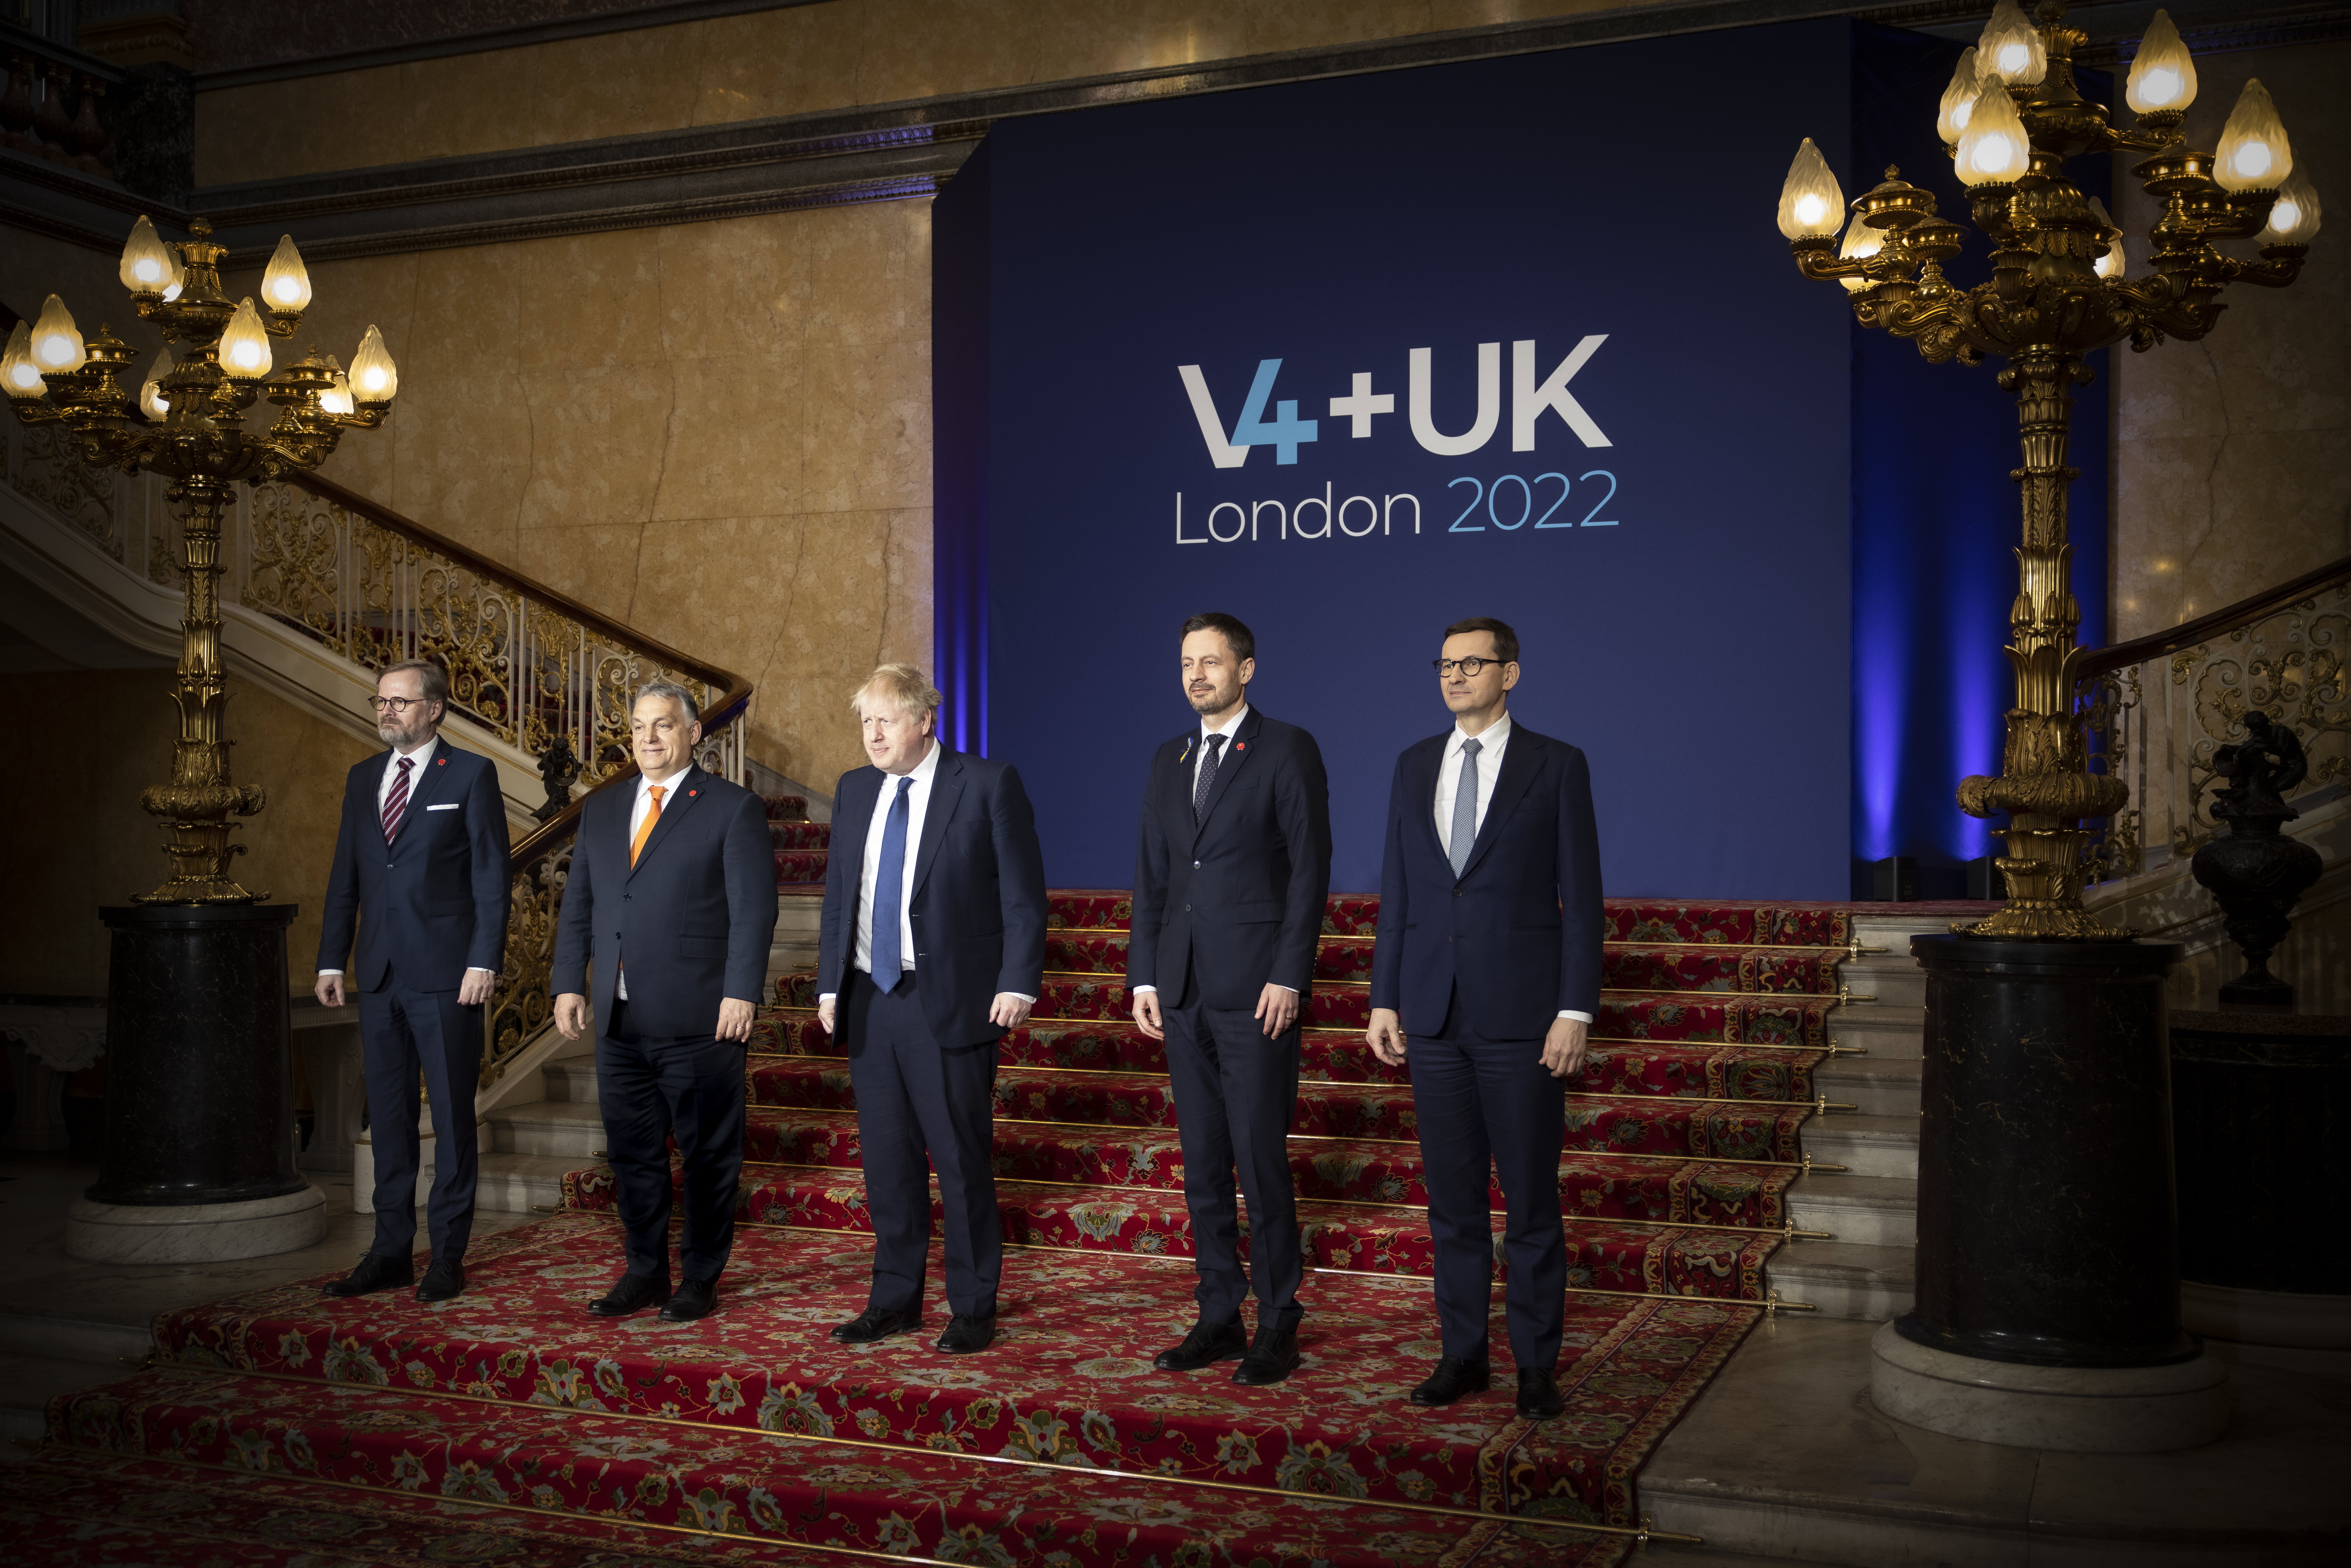 Orbán meets with V4, U.K. counterparts in London